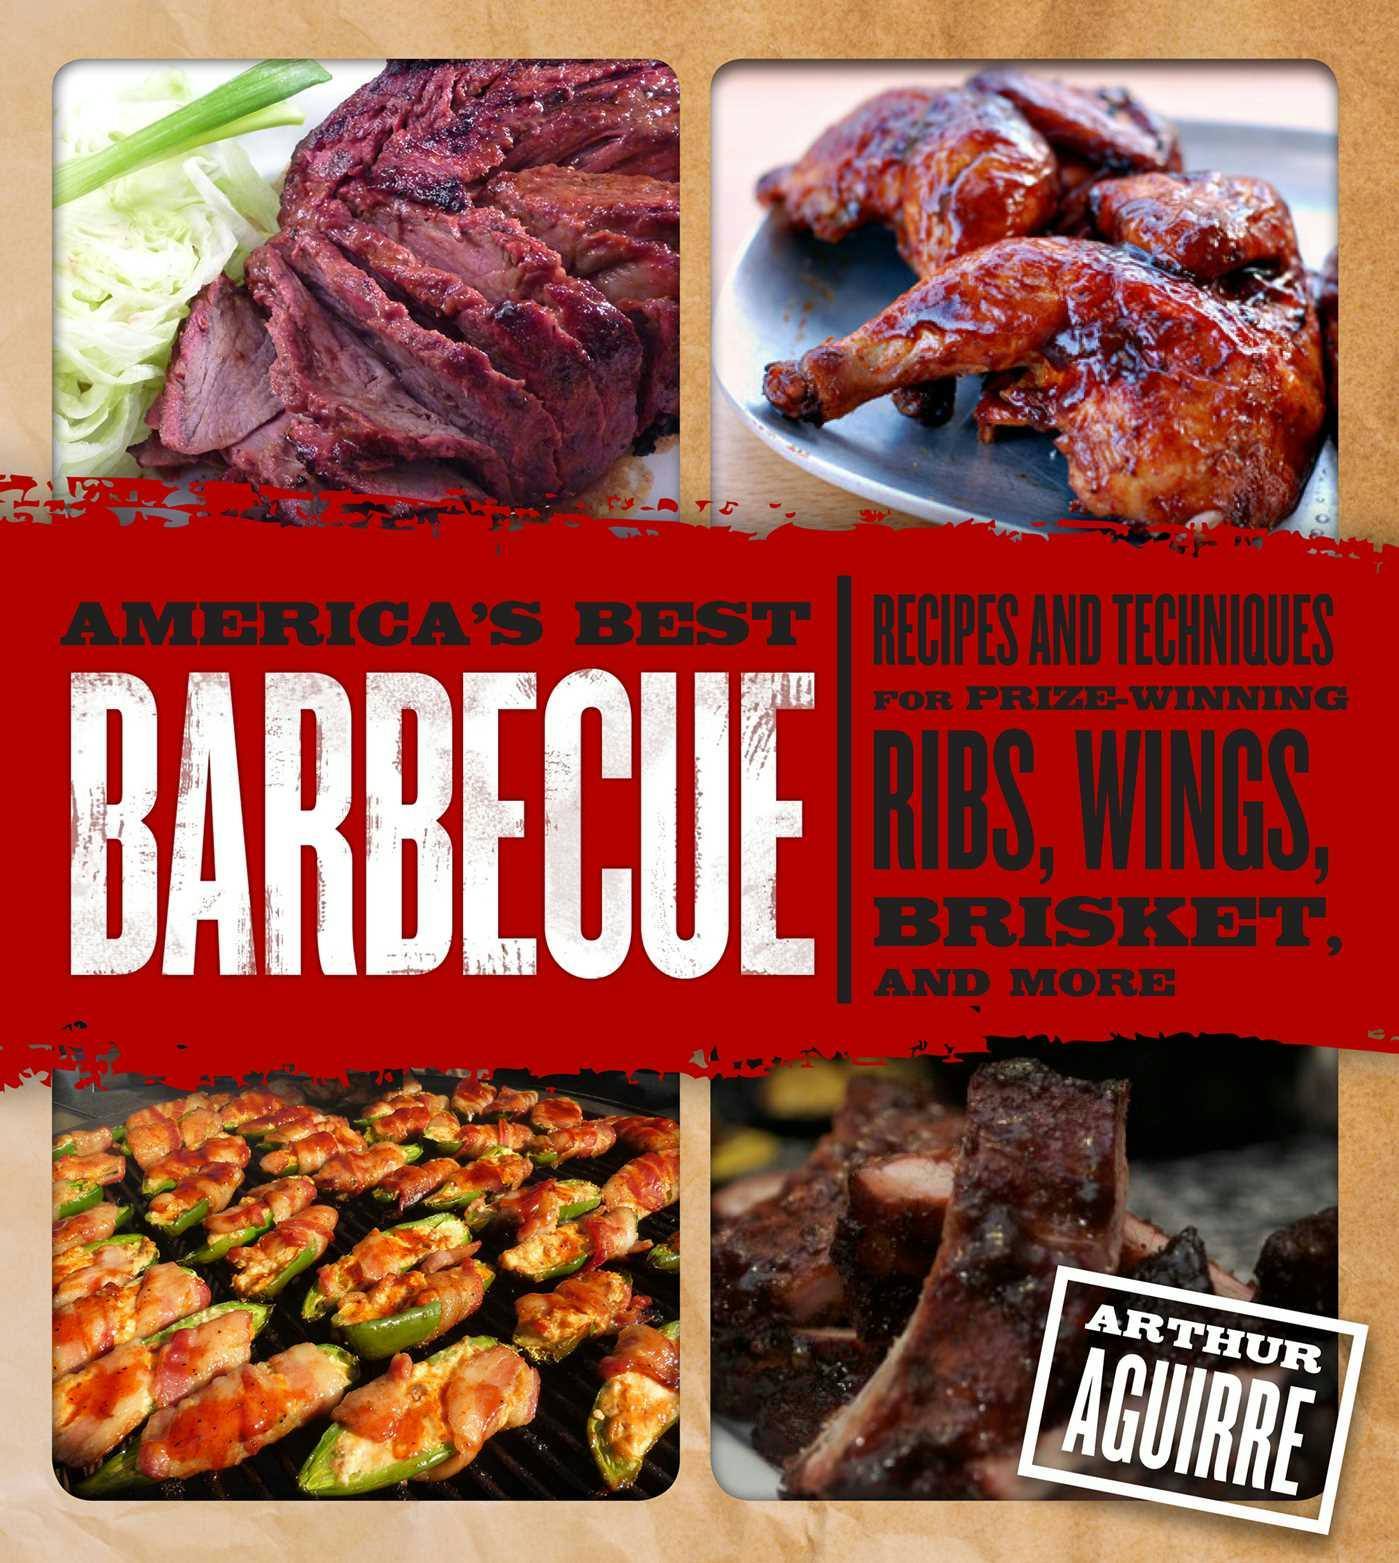 America's Best Barbecue: Recipes and Techniques for Prize-Winning Ribs, Wings, Brisket, and More - Arthur Aguirre